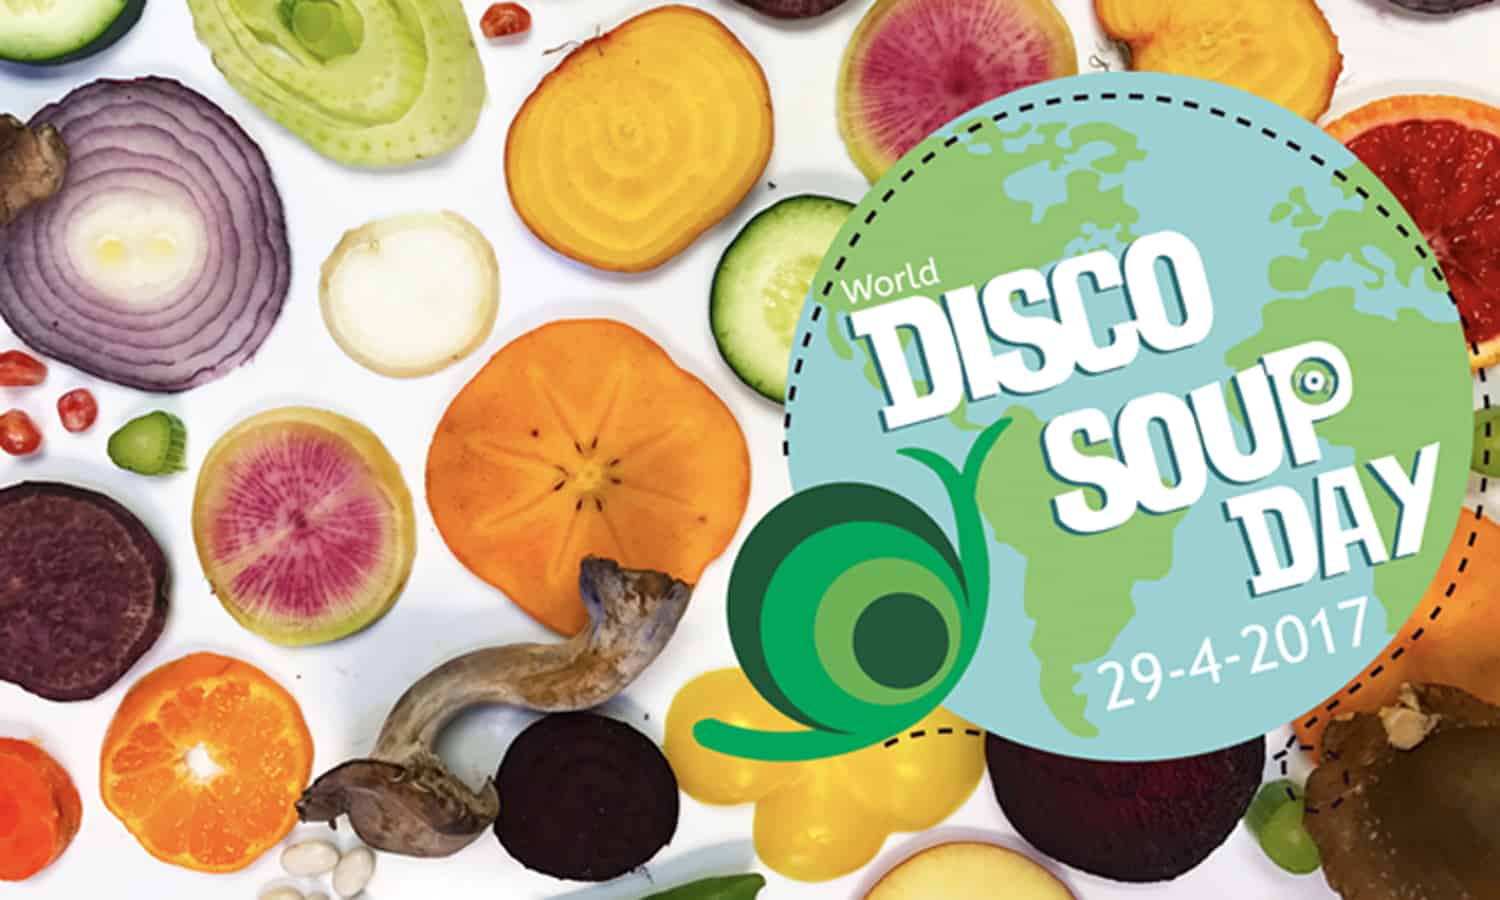 Feast and fight food waste at World Disco Soup Day – the largest food waste awareness event on the planet on April 29.